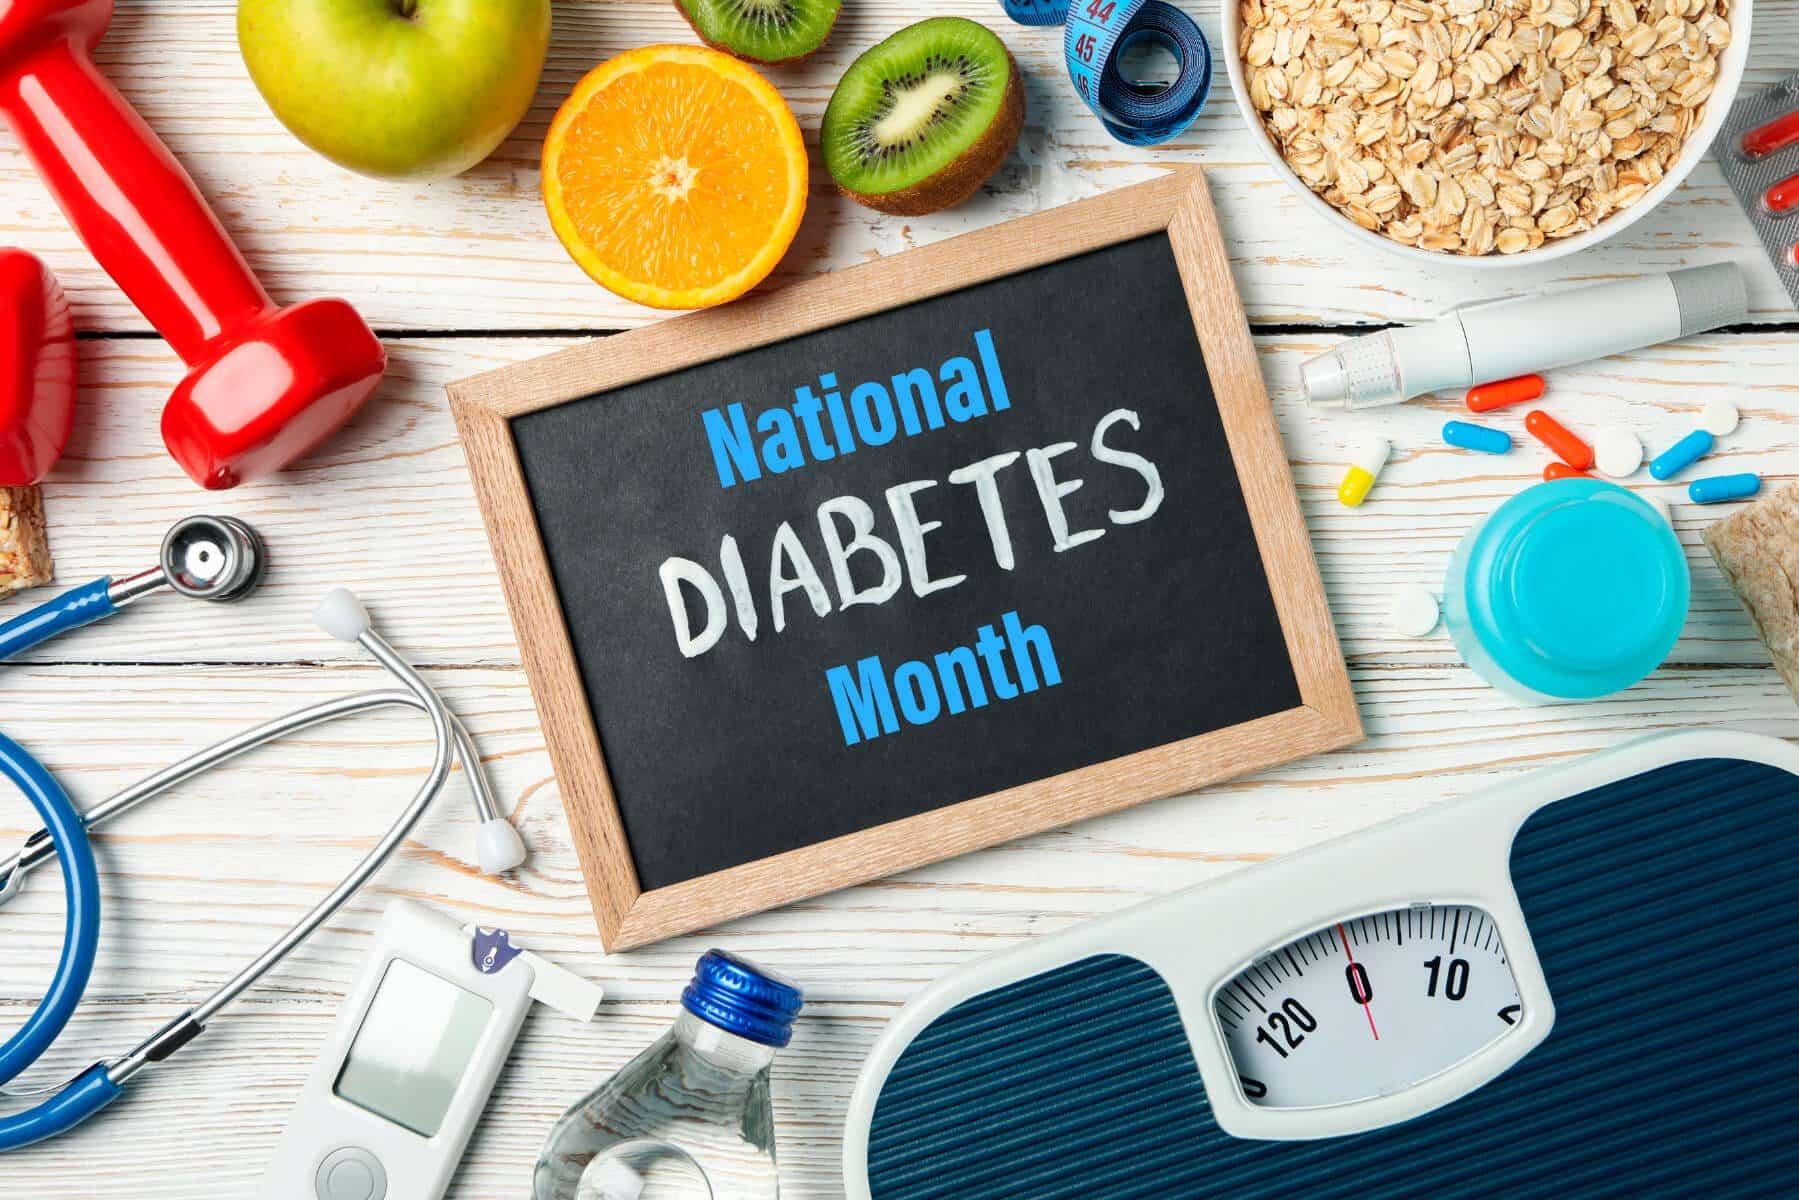 November is National Diabetes Month